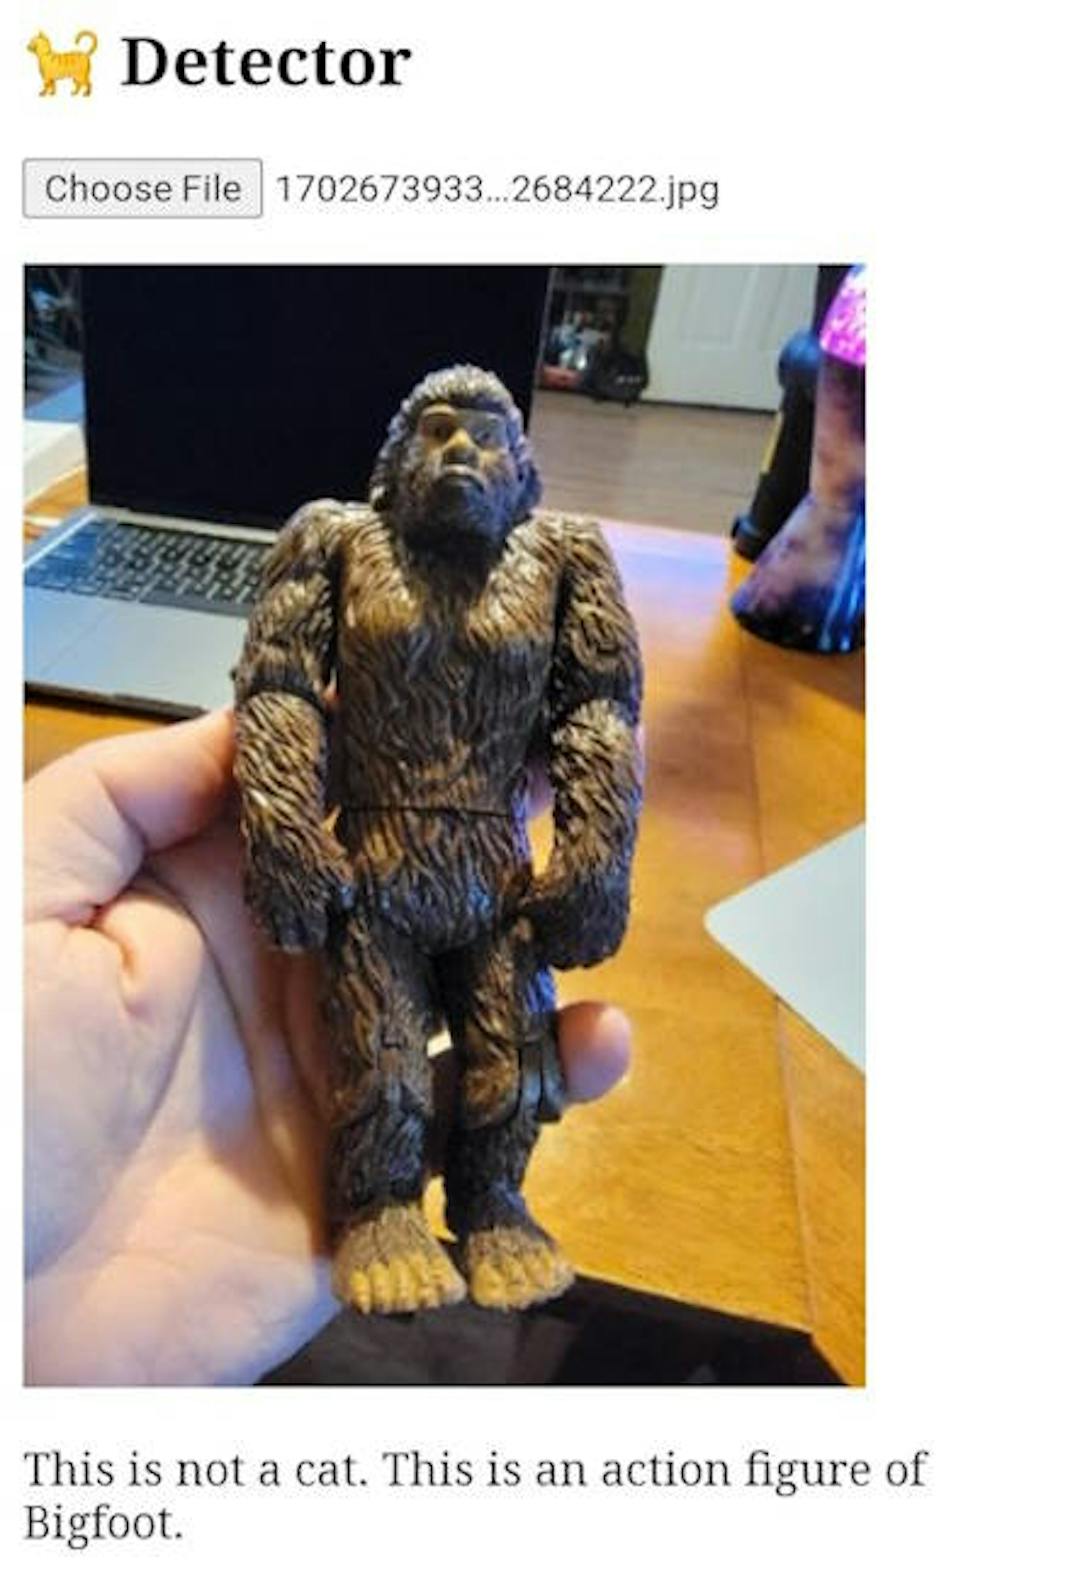 A picture of a Bigfoot action figure